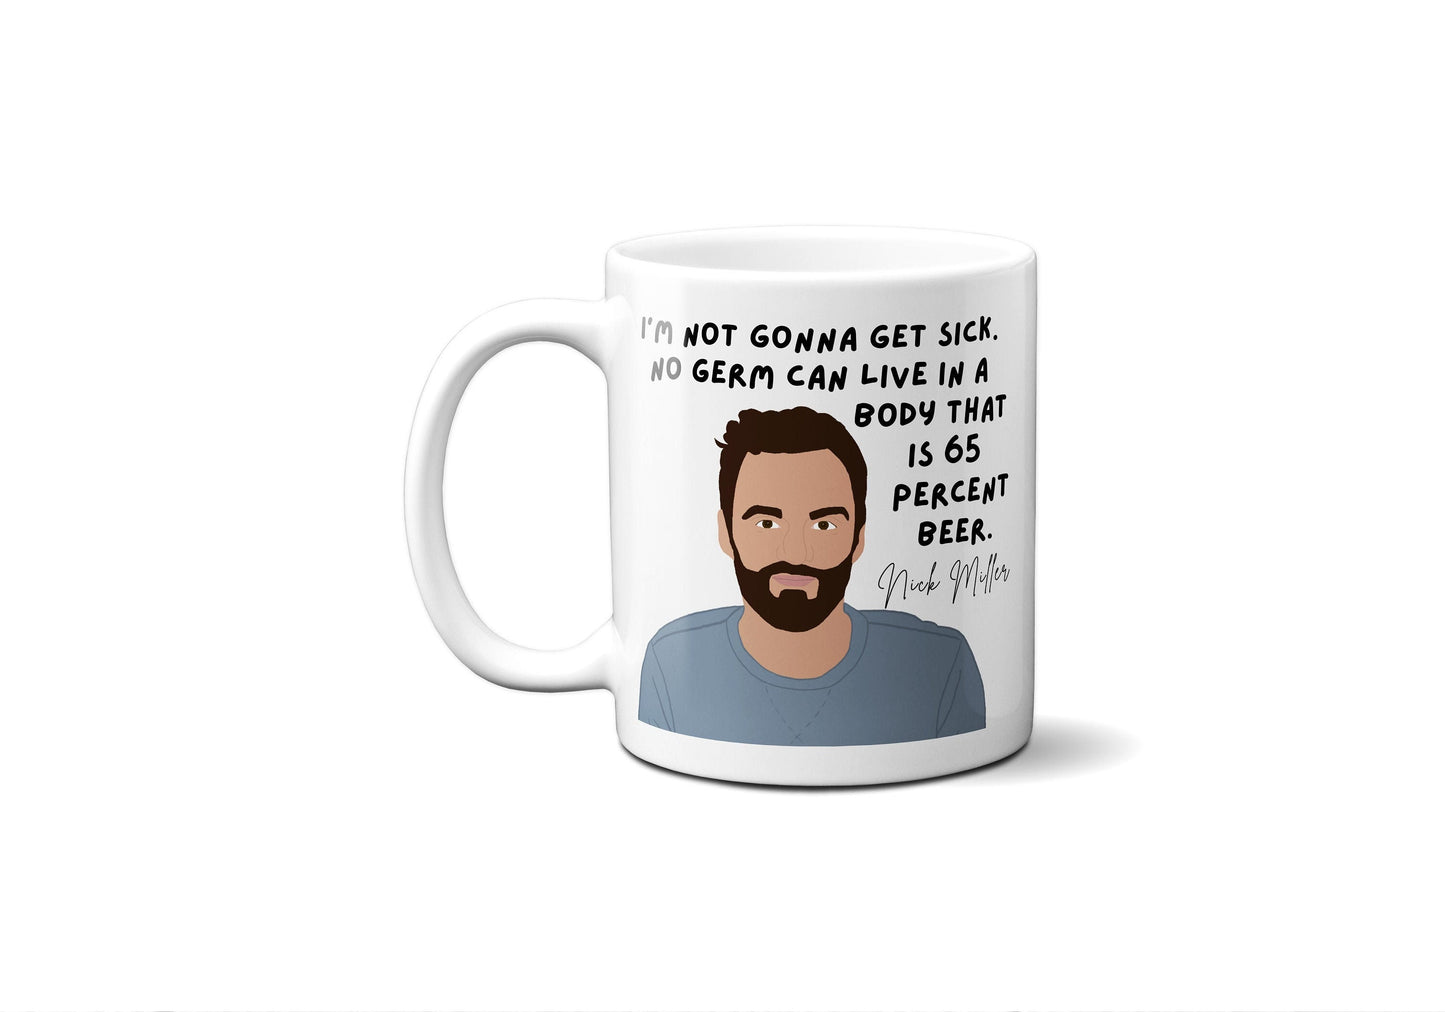 Nick Miller Mug | Nick Miller Quotes | New Girl Mug | No germ can live in a body that's 65 percent beer